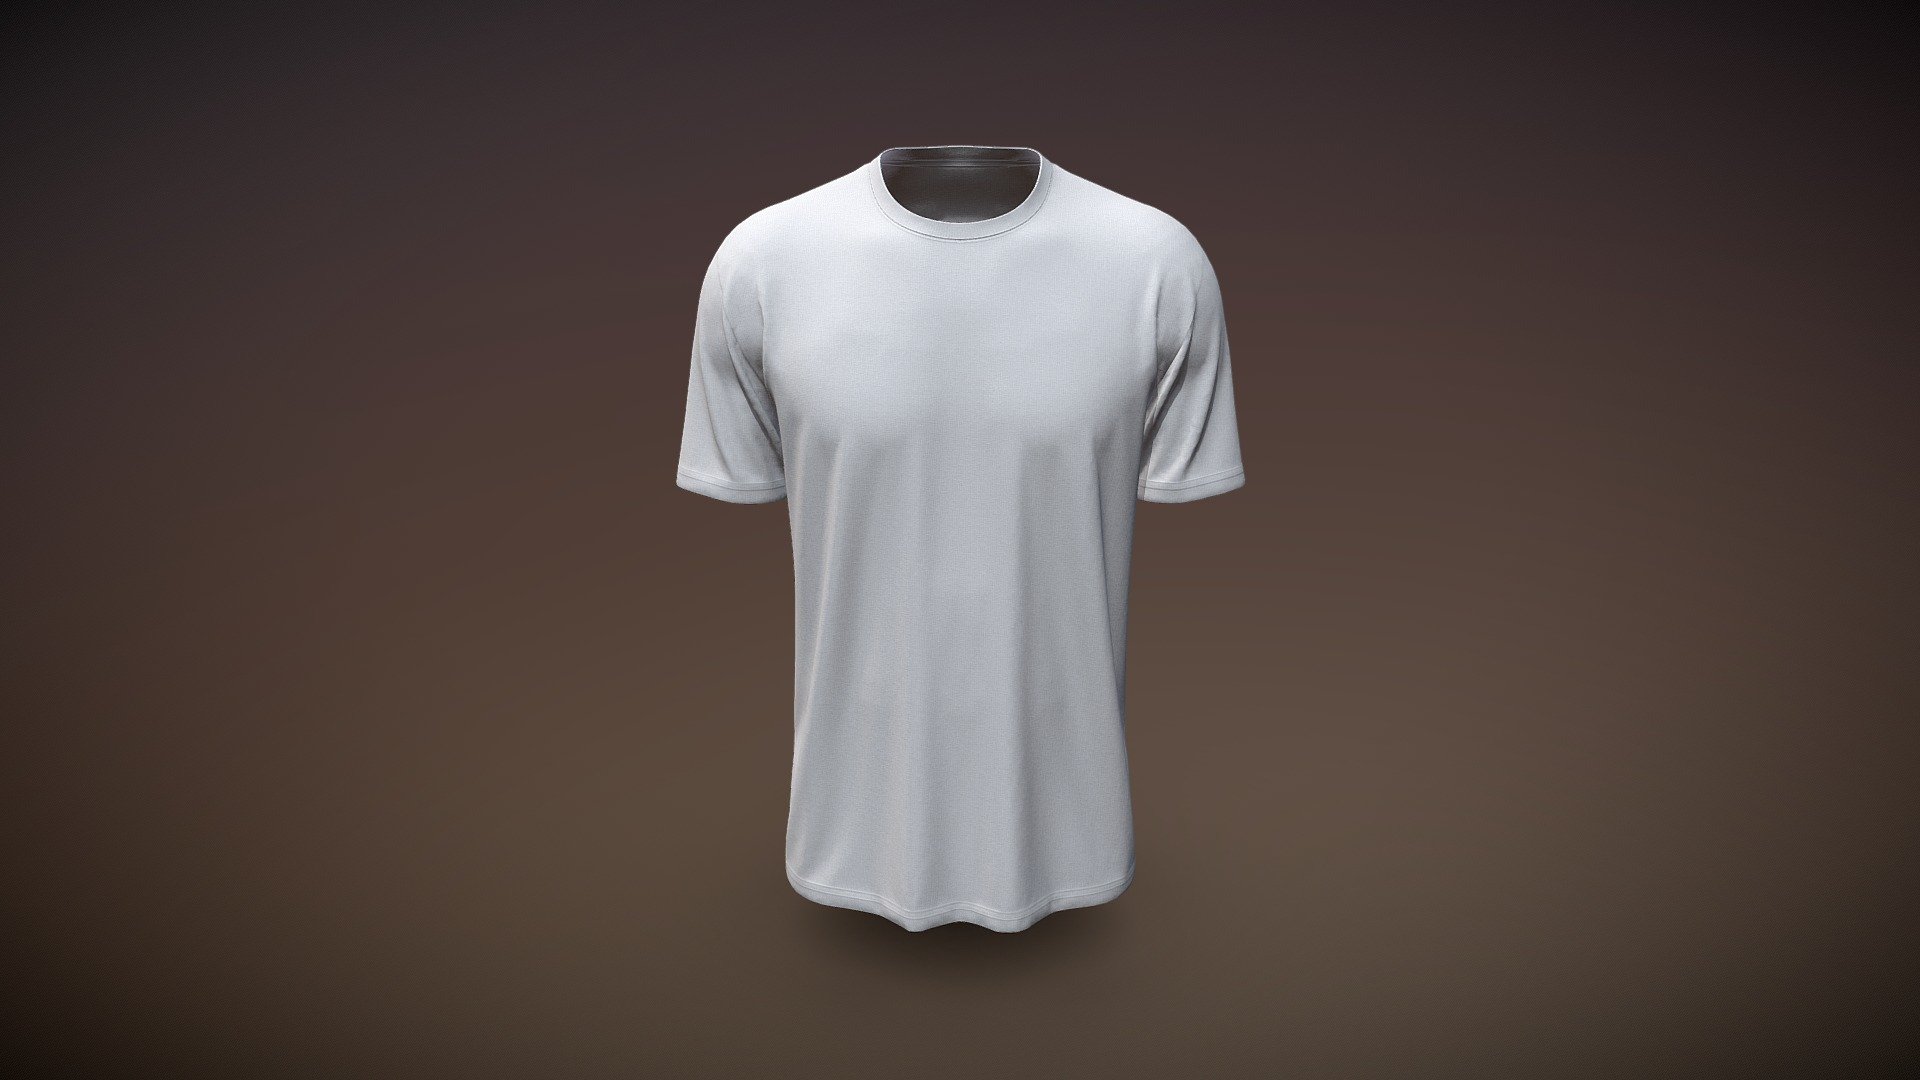 Cloth Title = Premium T- Shirts Design 

SKU = DG100125 

Category = Unisex 

Product Type = Tee 

Cloth Length = Regular 

Body Fit = Regular Fit 

Occasion = Casual  

Sleeve Style = Set In Sleeve 


Our Services:

3D Apparel Design.

OBJ,FBX,GLTF Making with High/Low Poly.

Fabric Digitalization.

Mockup making.

3D Teck Pack.

Pattern Making.

2D Illustration.

Cloth Animation and 360 Spin Video.


Contact us:- 

Email: info@digitalfashionwear.com 

Website: https://digitalfashionwear.com 


We designed all the types of cloth specially focused on product visualization, e-commerce, fitting, and production. 

We will design: 

T-shirts 

Polo shirts 

Hoodies 

Sweatshirt 

Jackets 

Shirts 

TankTops 

Trousers 

Bras 

Underwear 

Blazer 

Aprons 

Leggings 

and All Fashion items. 





Our goal is to make sure what we provide you, meets your demand 3d model